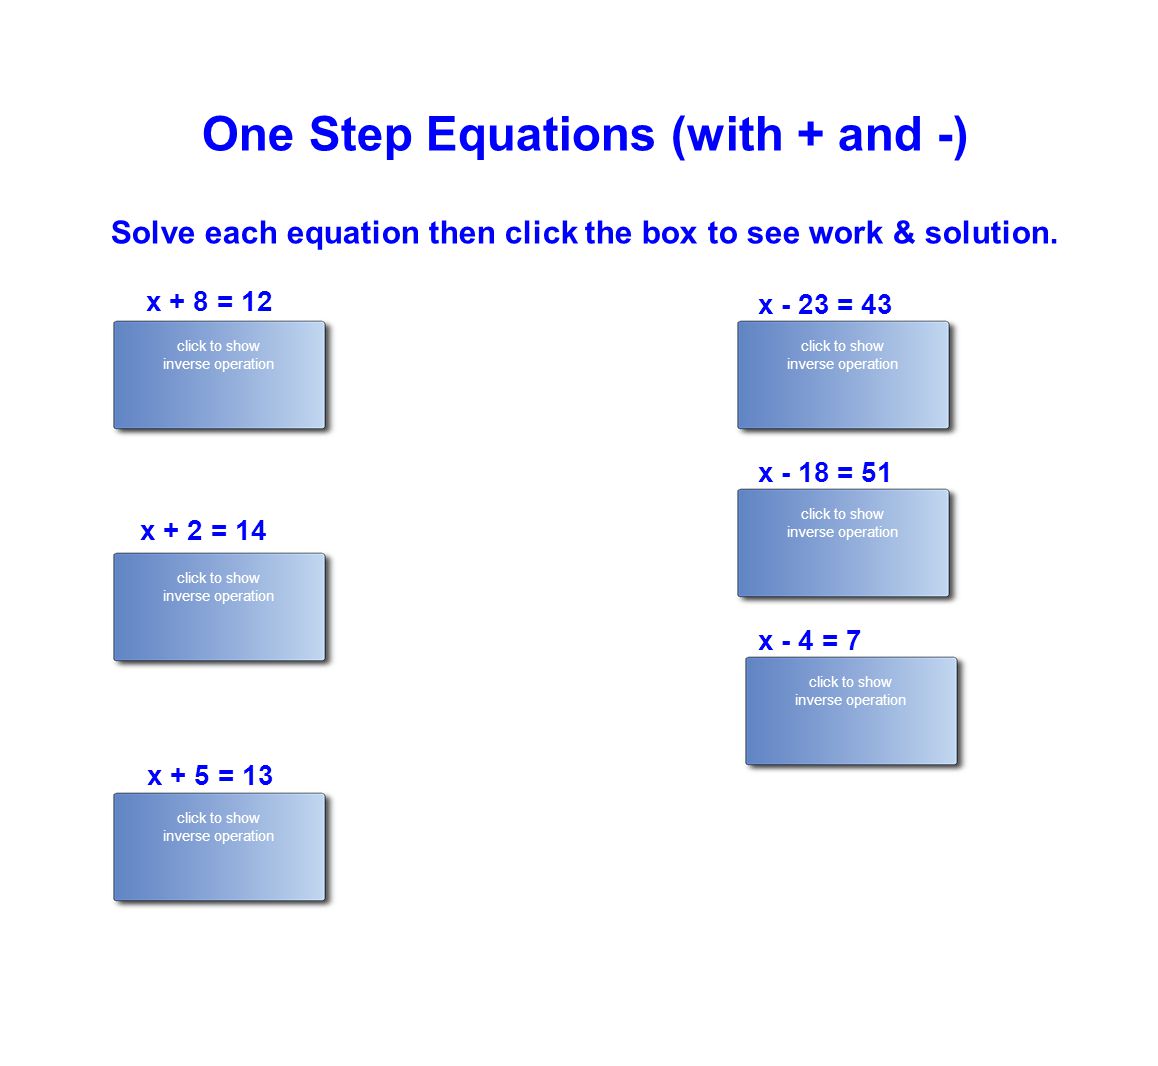 One Step Equations (with + and -)